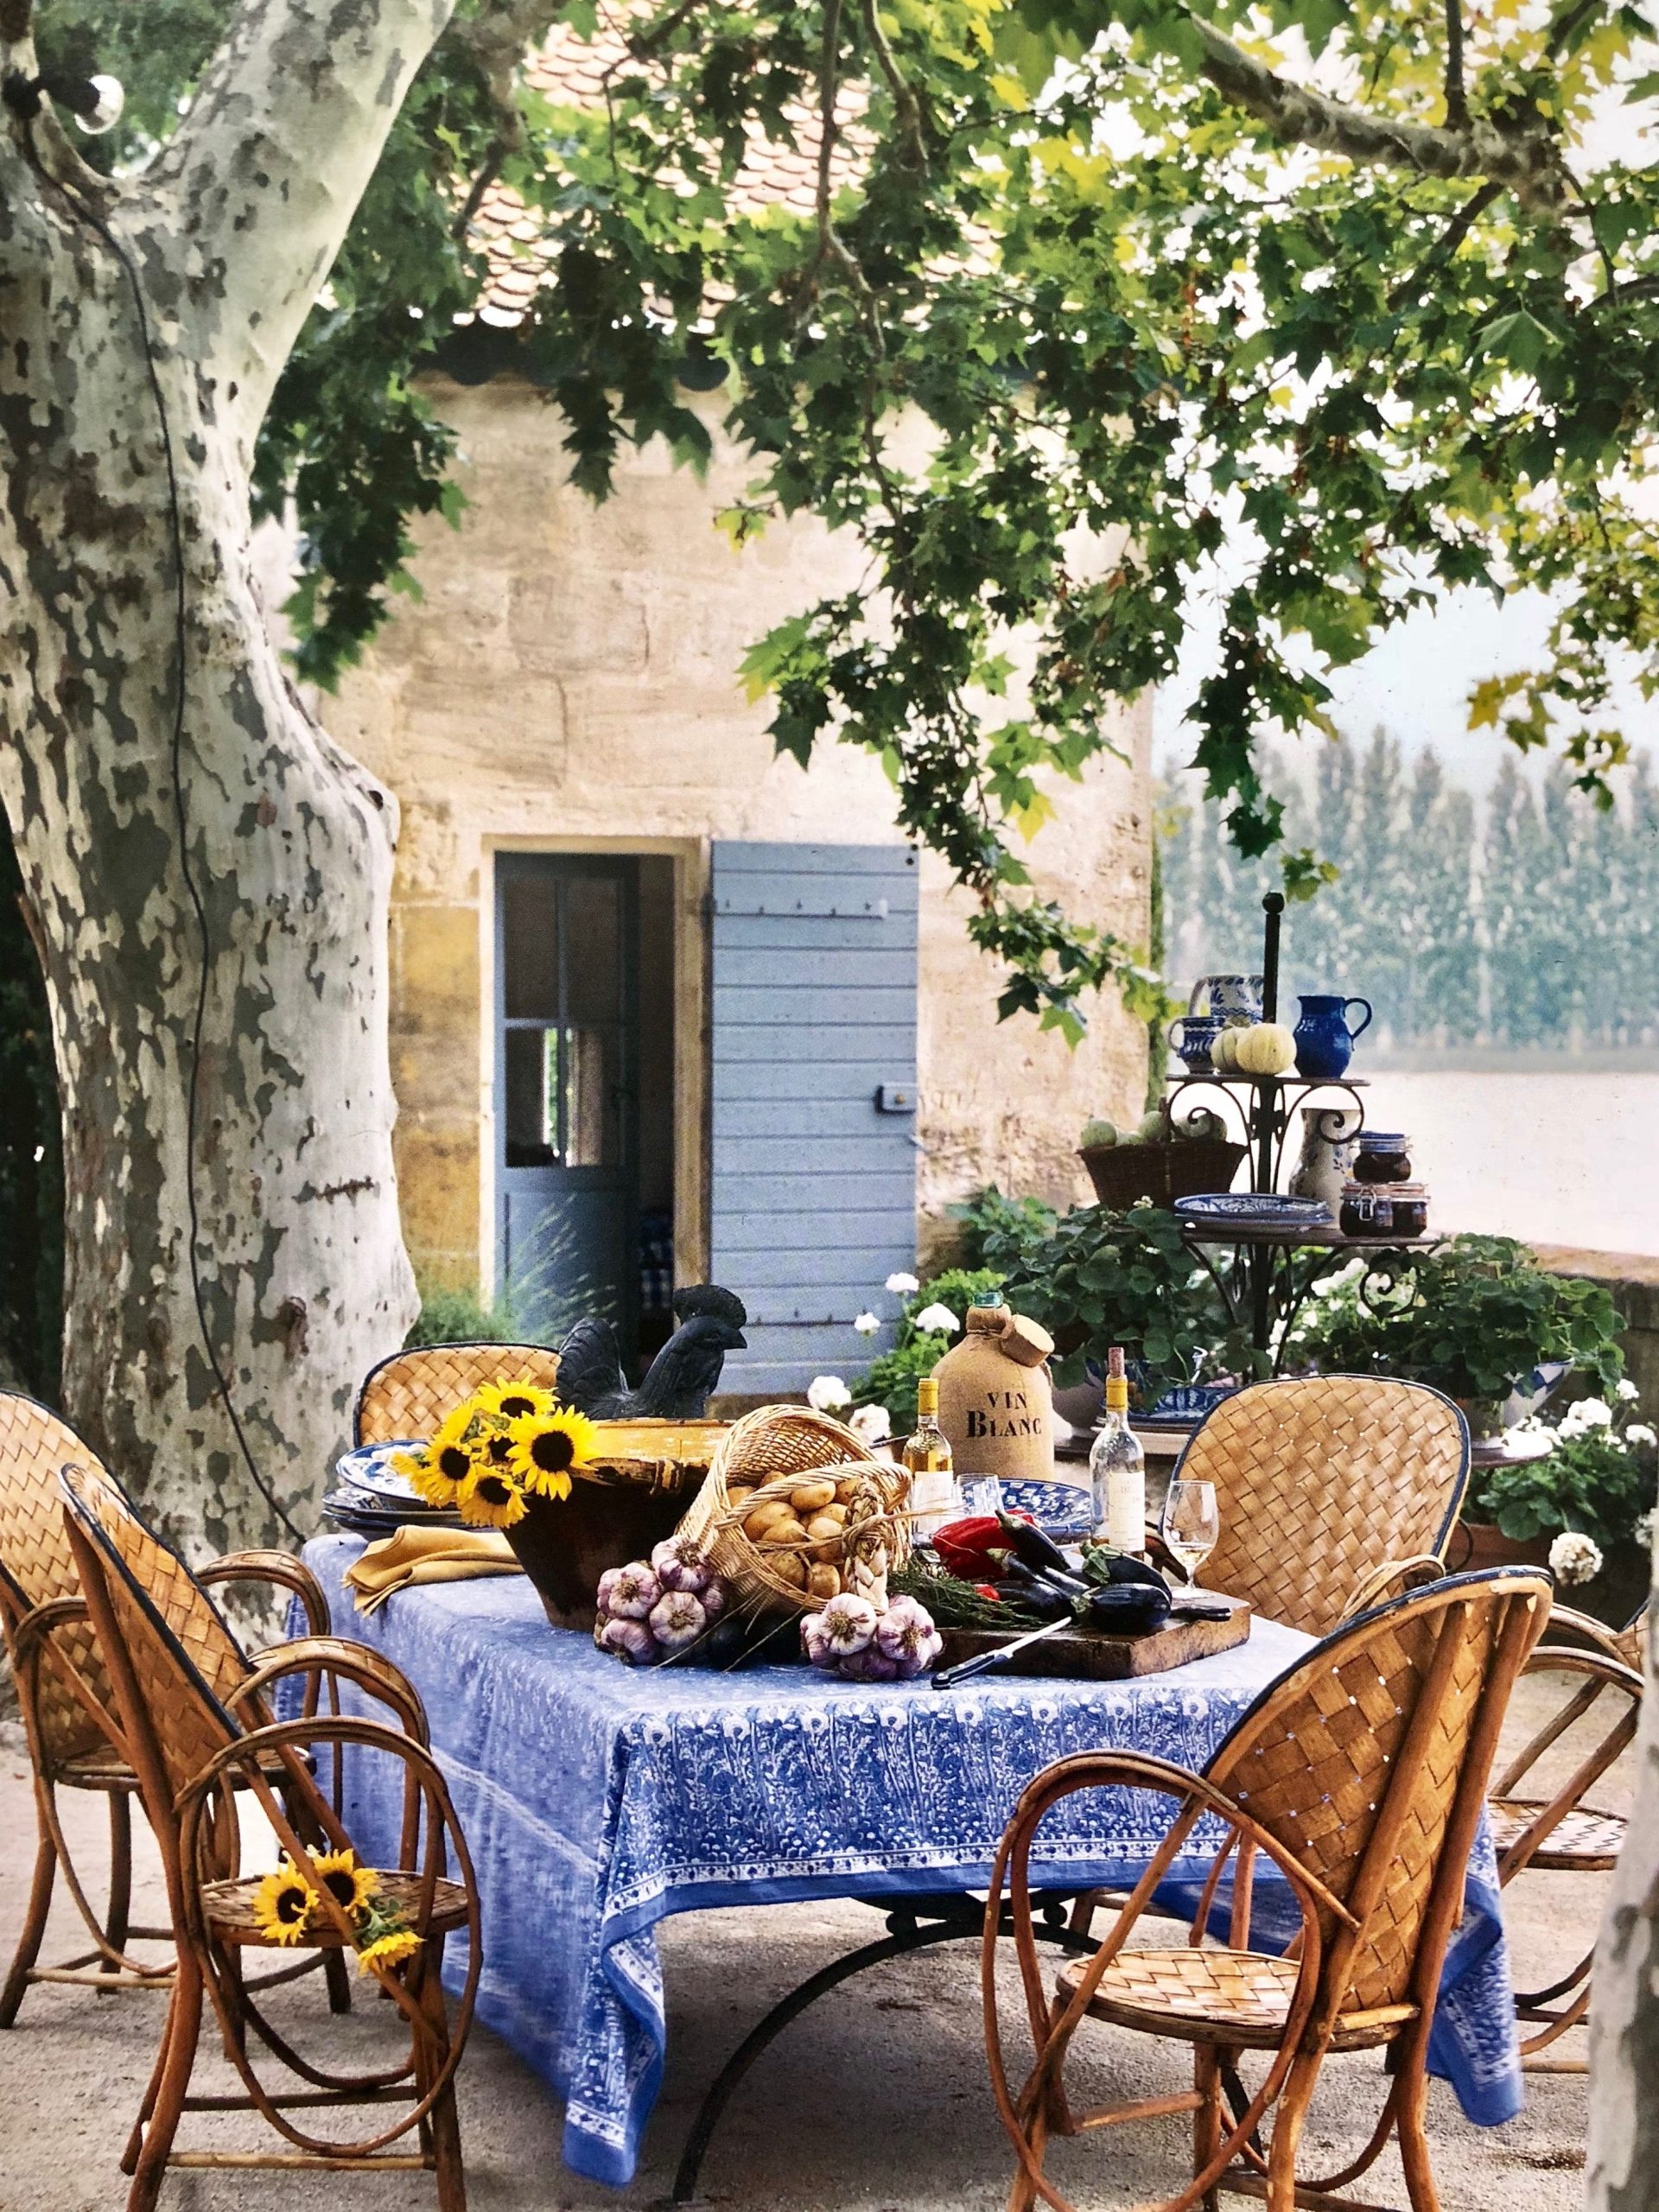 A Touch Of Provence: Infusing Spaces With Lavender inspired Decor